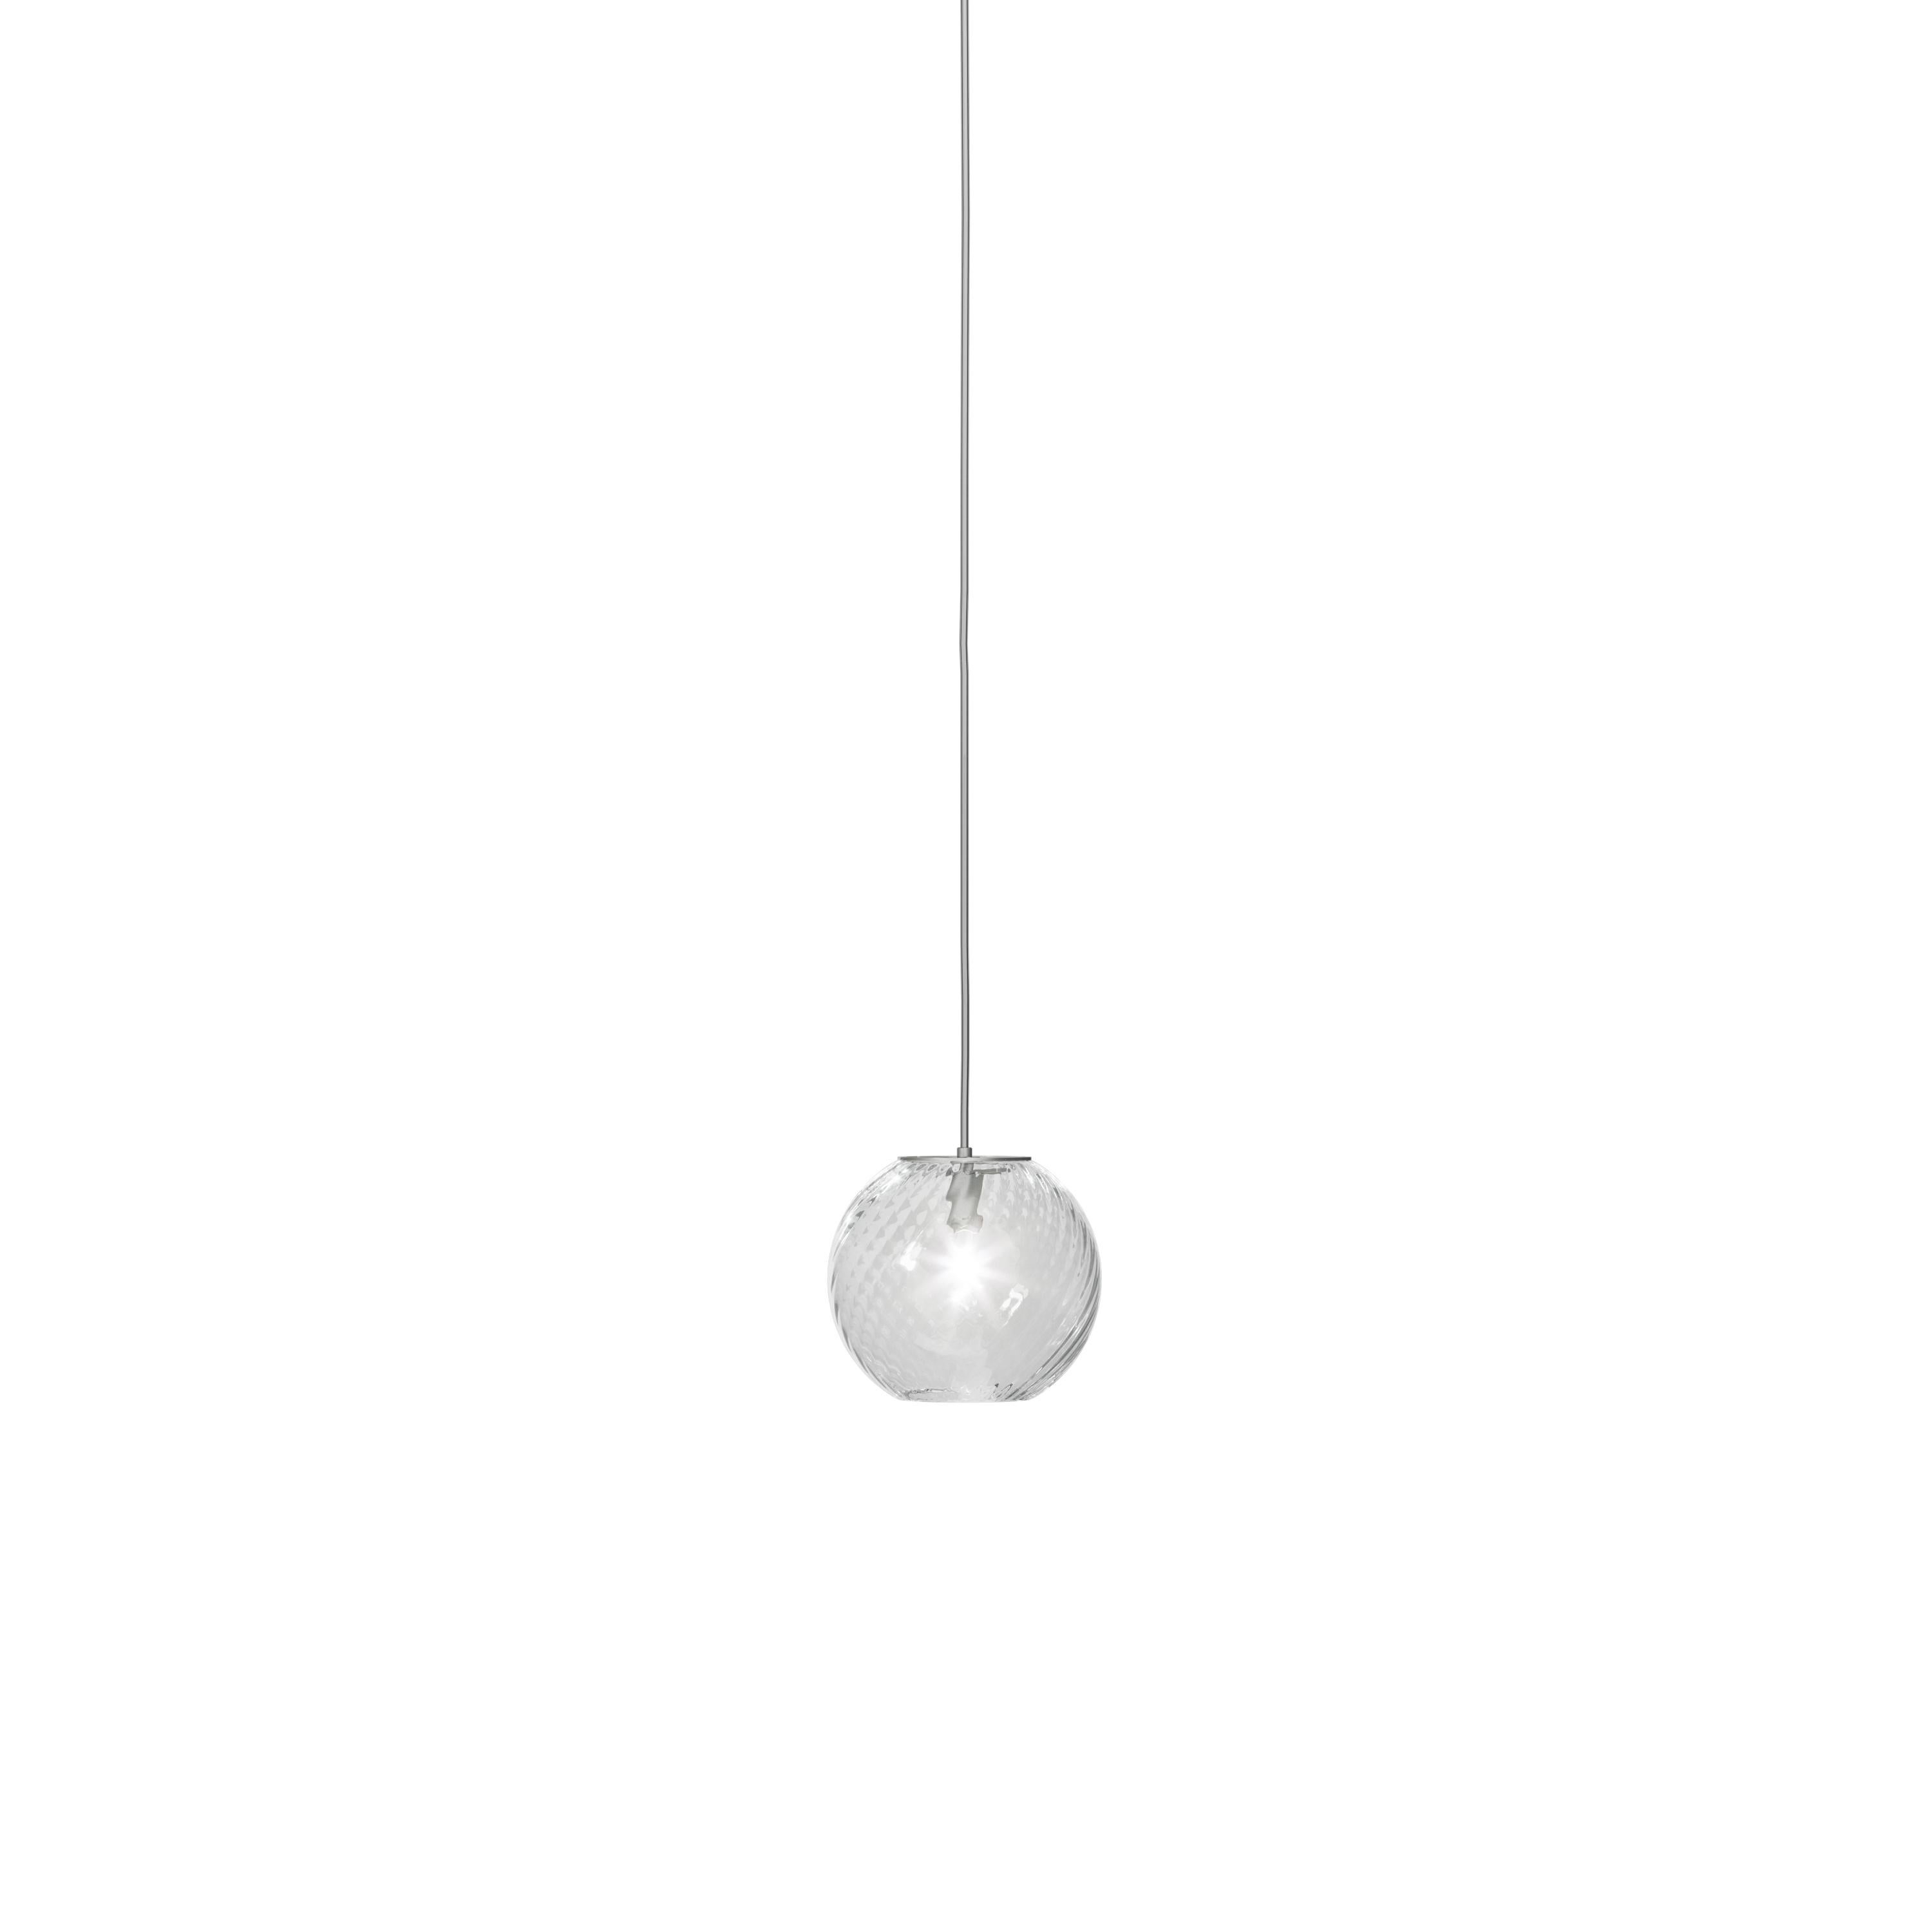 Spherical blown glass elements available in four sizes and two decorations, with and without lighting source. The special design allows the installation of more vertical glass elements and infinite custom combinations.

Light source: 
1x60W G9.
 